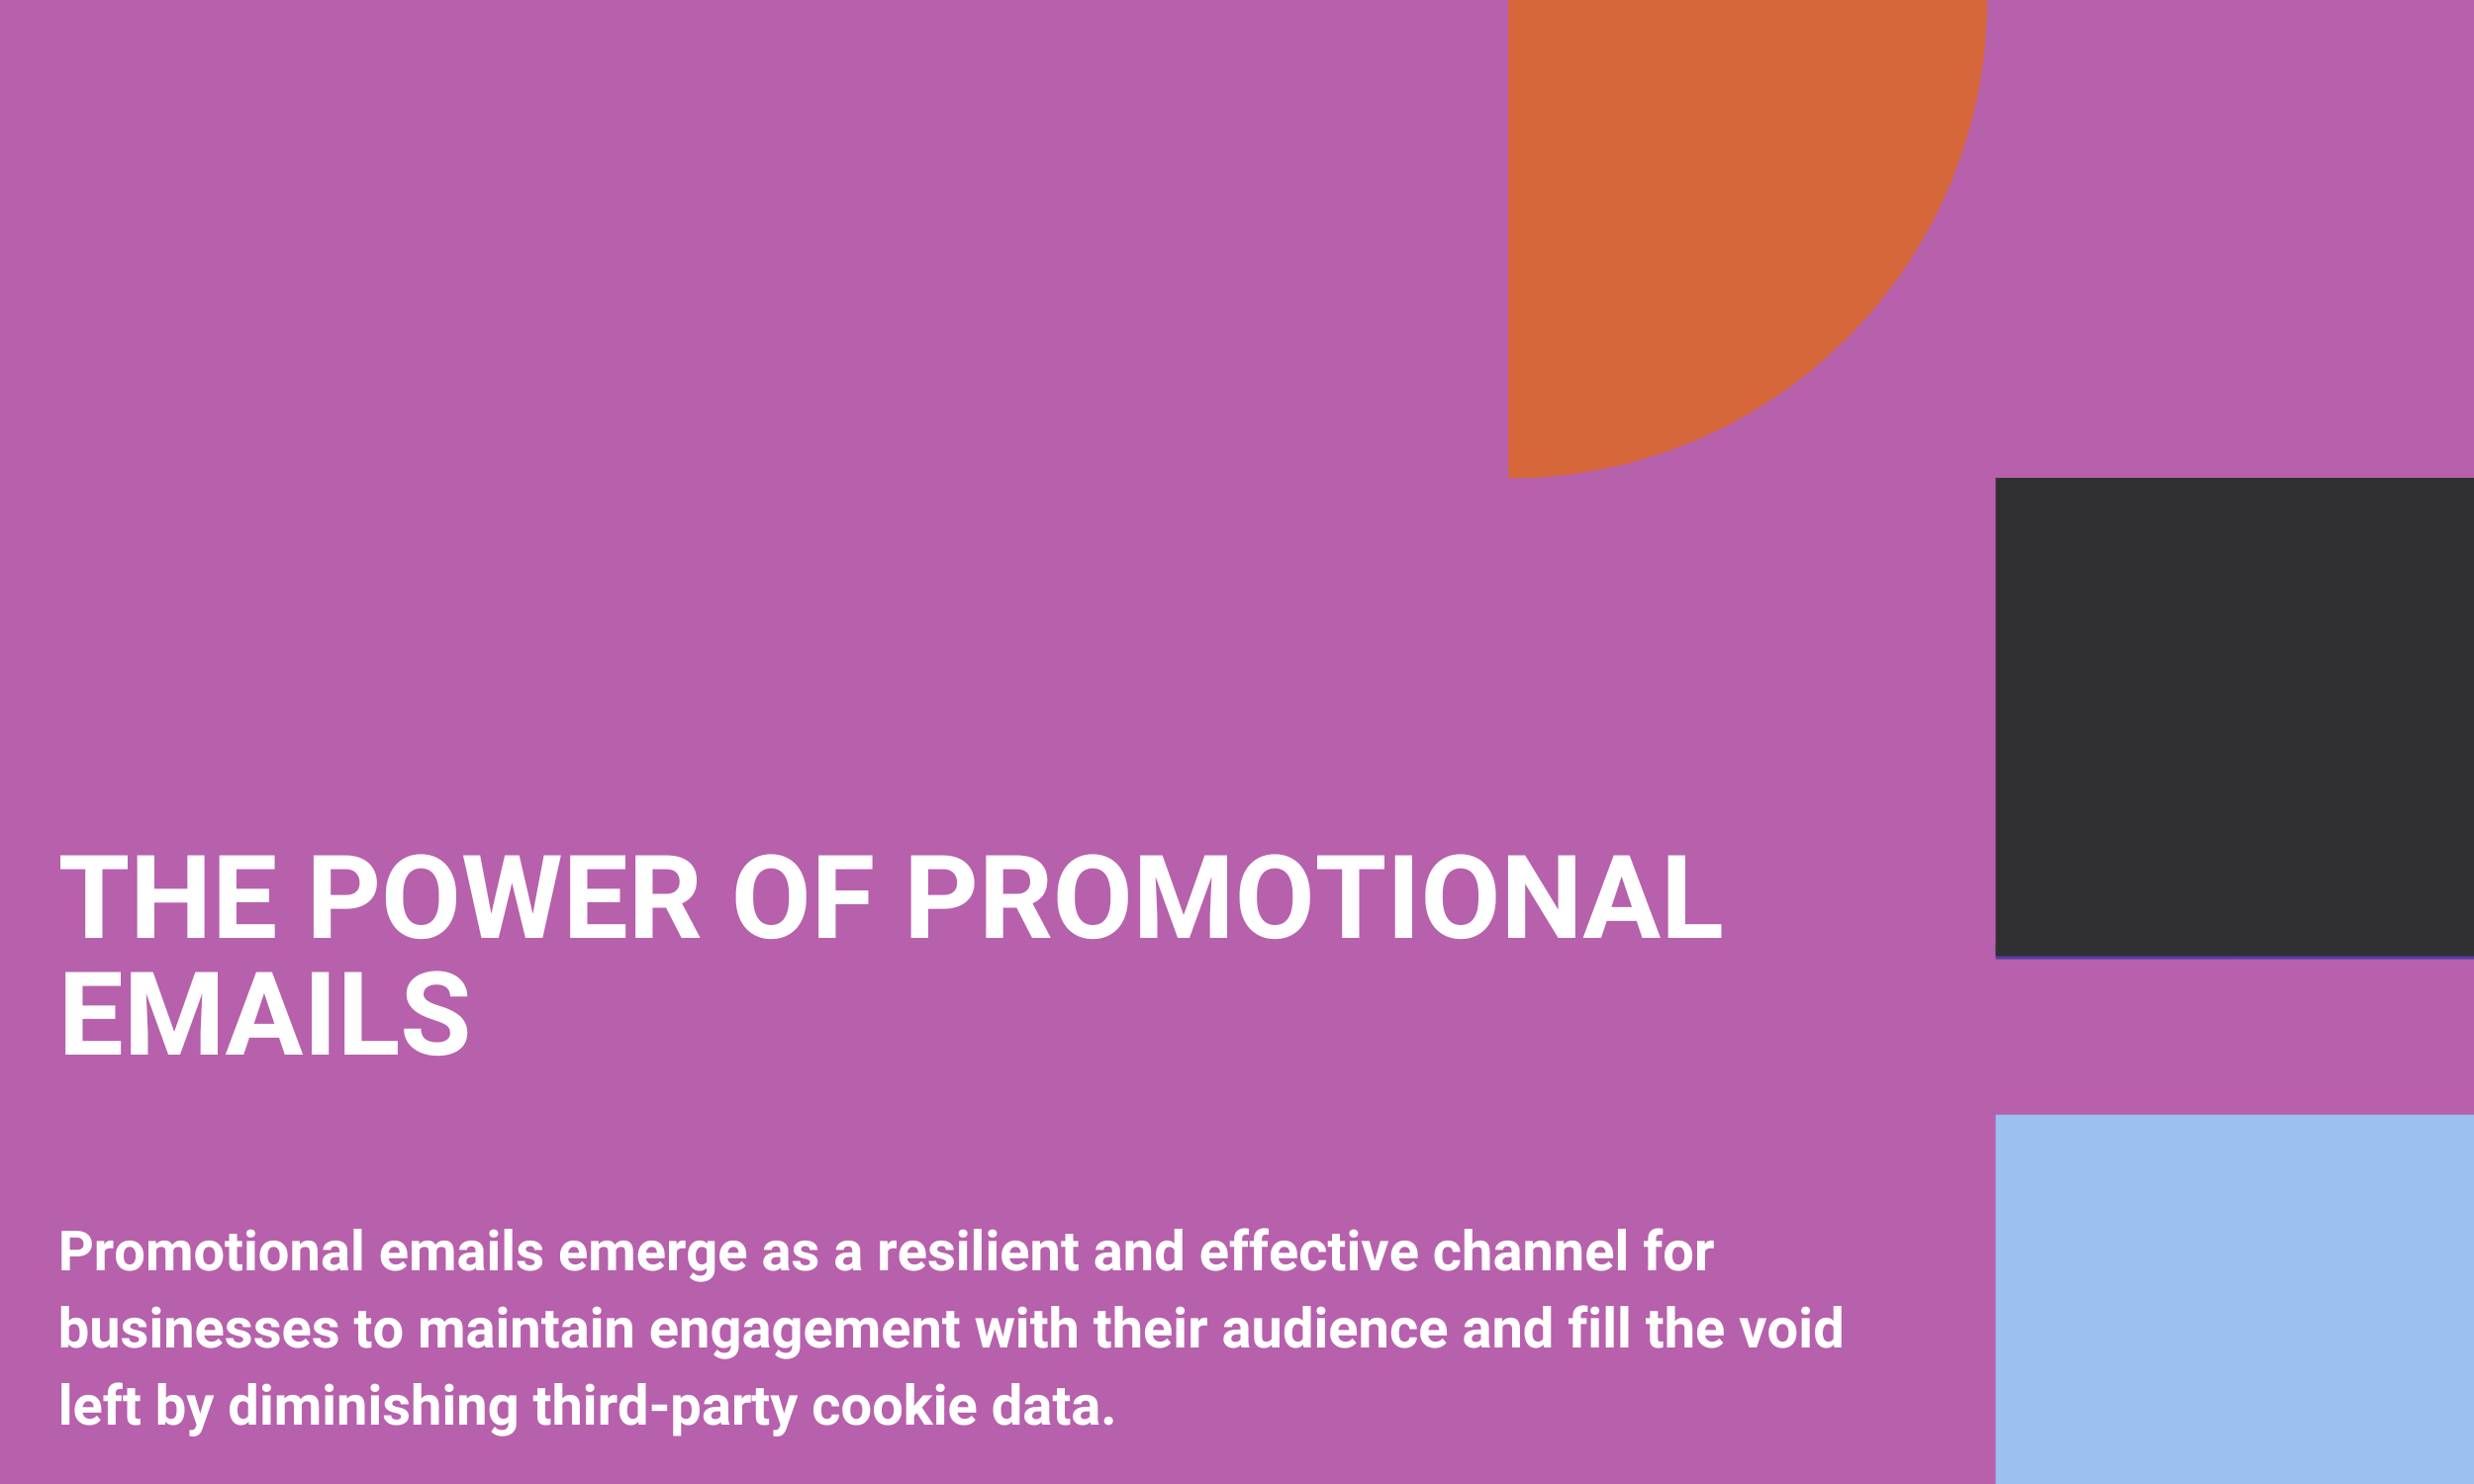  The Power of Promotional Emails: Leveraging First-Party Data for Targeted Engagement